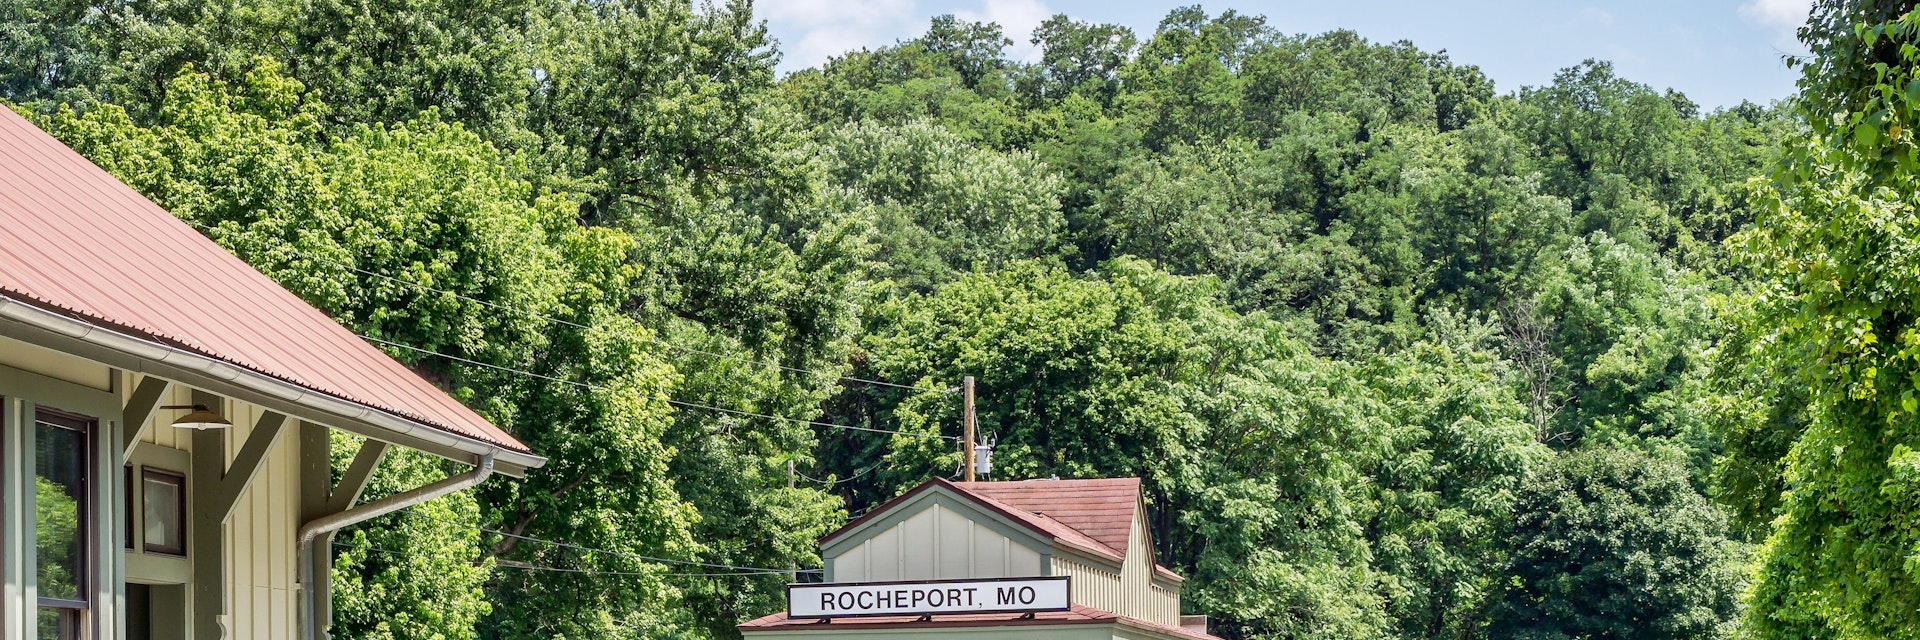 ROCHEPORT, MO, USA - AUGUST 1, 2015: Cyclists at Rocheport station on Katy Trail (237 mile bike trail stretching across most of the state of Missouri converted from abandoned railroad); 
Katy Trail State Park

 Shutterstock ID 353060654; your: Bridget Brown; gl: 65050; netsuite: Online Editorial; full: POI Image Update